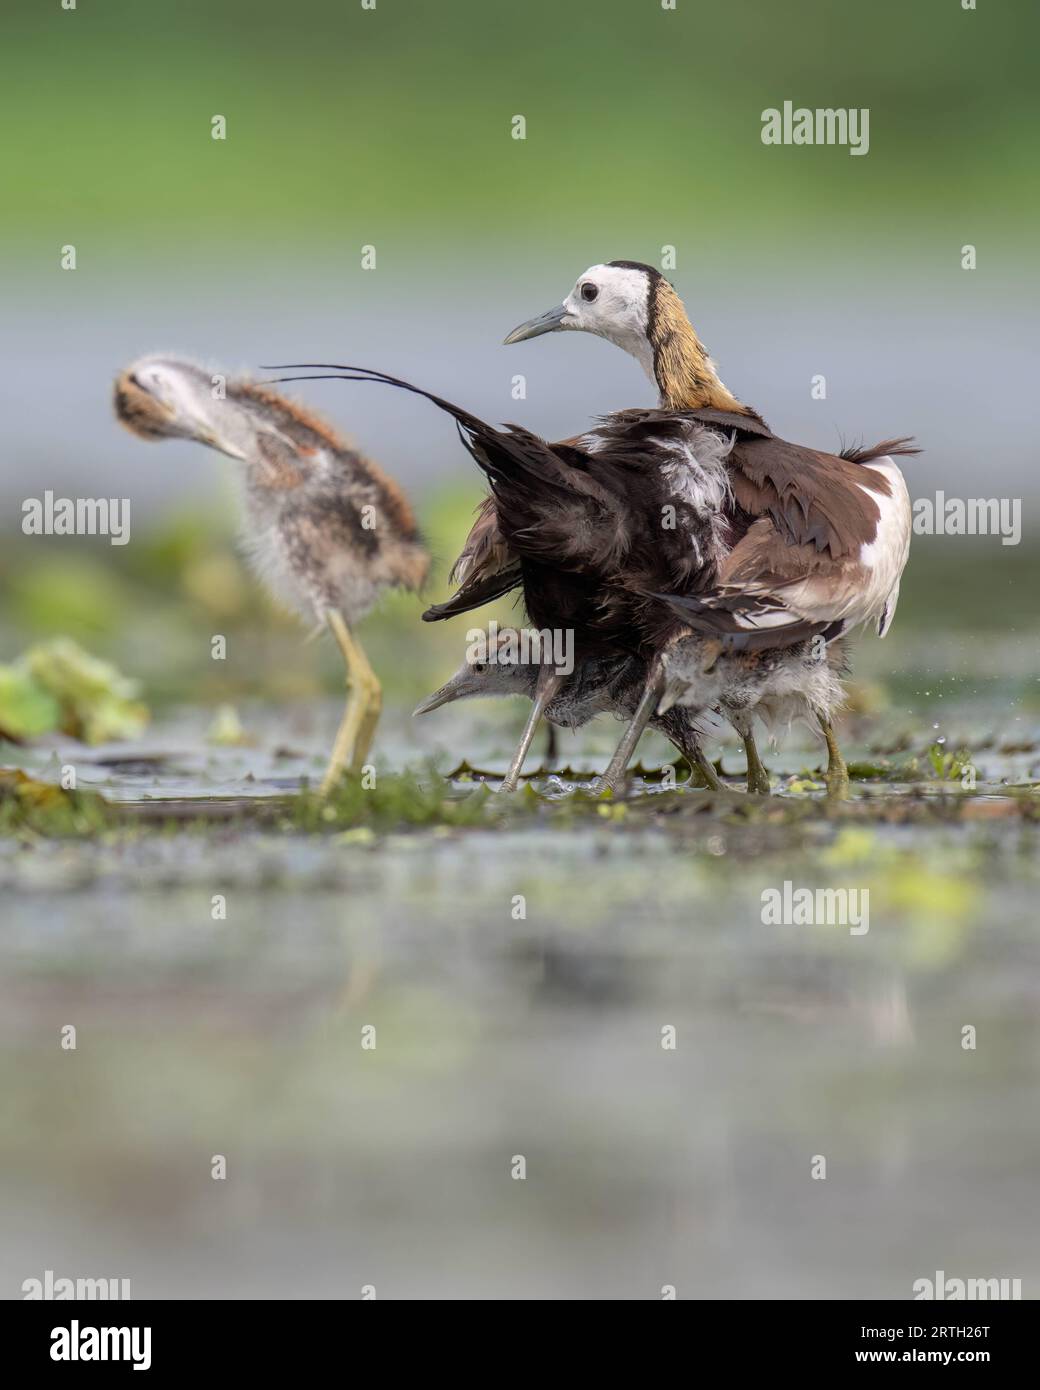 Father pheasant jacana walking with playful chick siblings. West Bengal, India: CUTE images of pheasant tailed Jacanas chicks seeking shelter from the Stock Photo